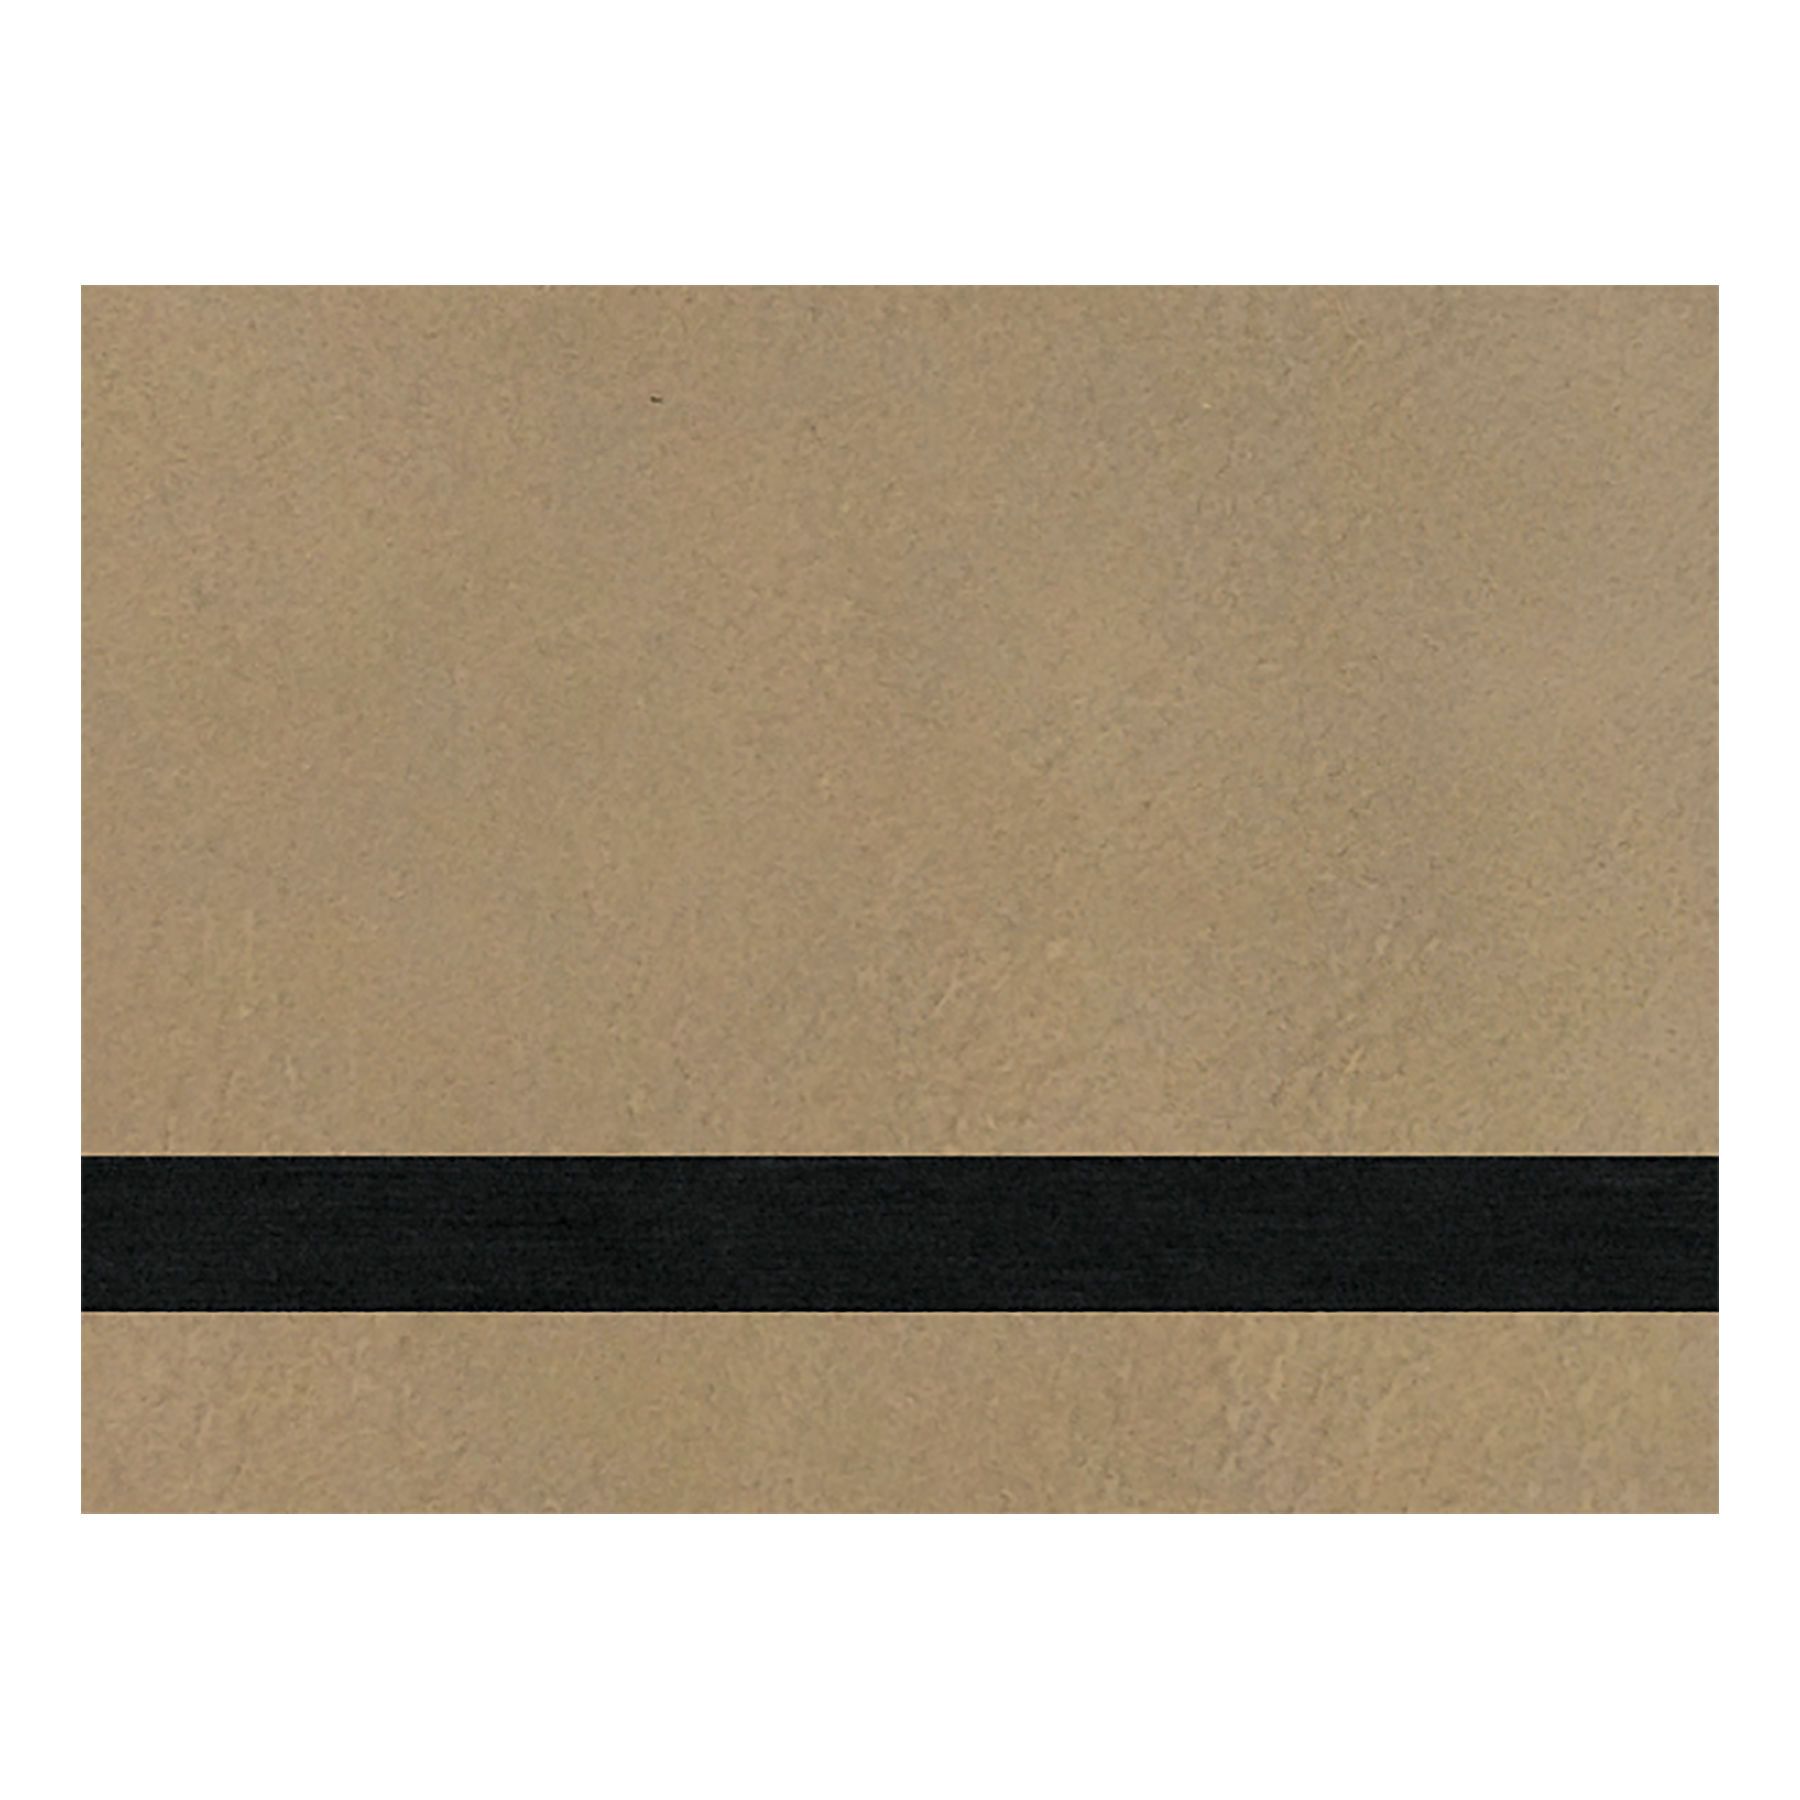 PRE-ORDER! Full Size Laserable Leatherette Sheet Stock, Epilog Fusion Pro Laser Engravers (Available Jan. 2022) Engraving Supplies Craftworks NW Fusion Pro 24 (24" x 24") Light Brown/Black 